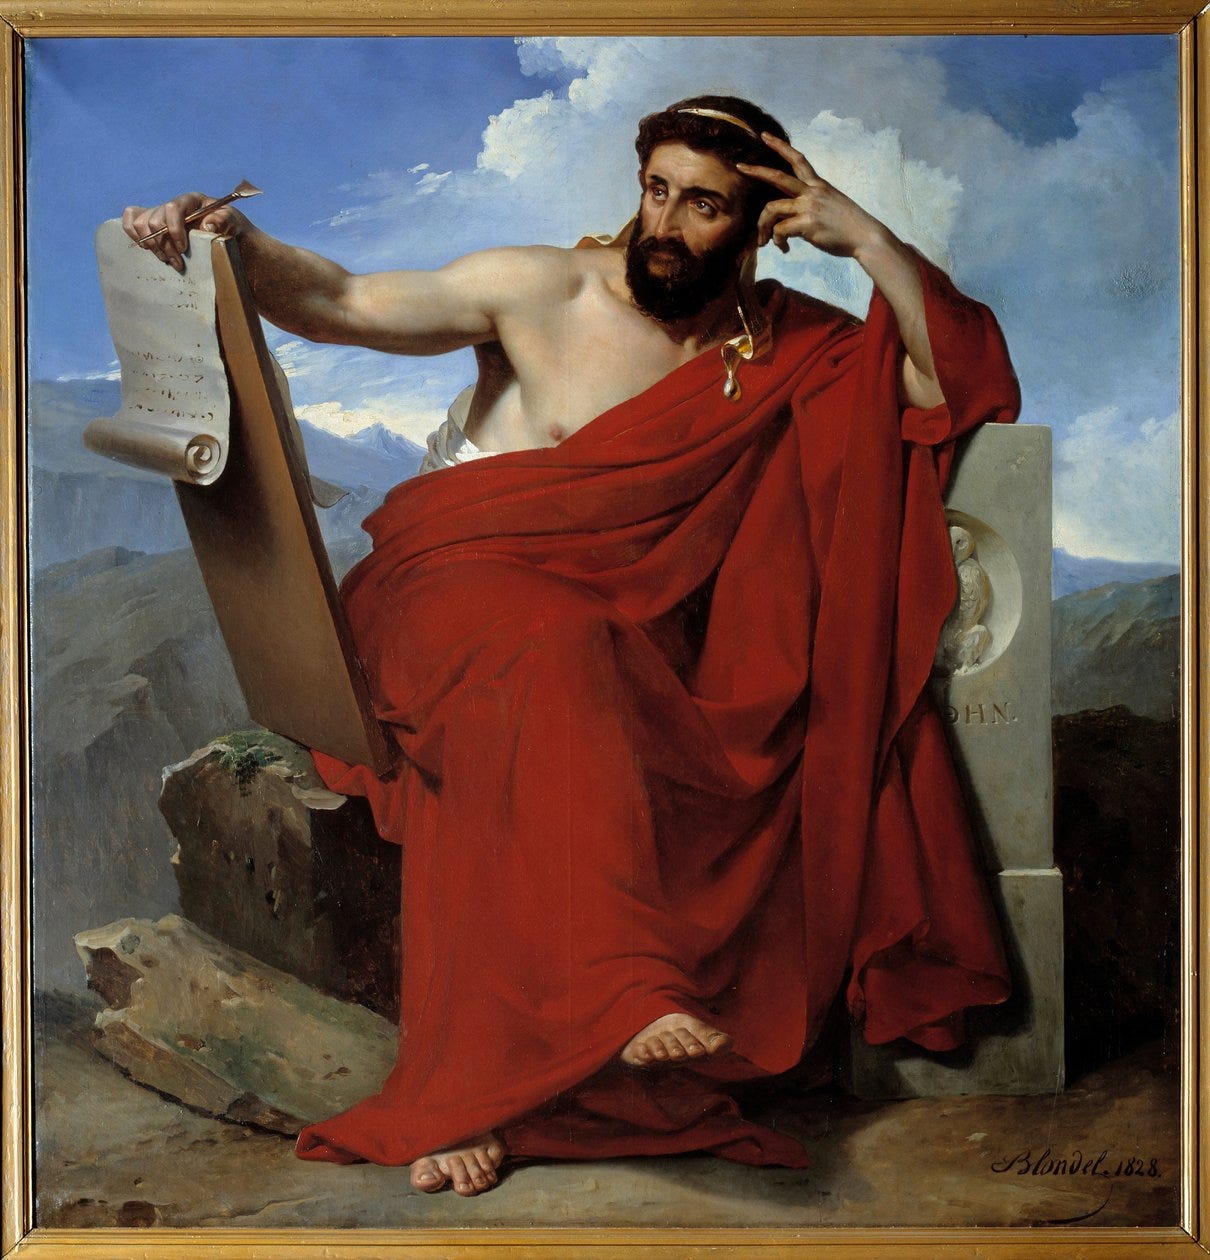 Portrait of Solon Legislator and Poet of Athenes (ca. 640-ca. 588 BC) Painting by Merry Joseph Blondel (1781-1853) 1828 Amiens, Musee de Picardie - Portrait of the poet and legislator Solon of Athens (circa 640-c. 588 BC). Painting by Merry Joseph Blondel  by Merry Joseph Blondel